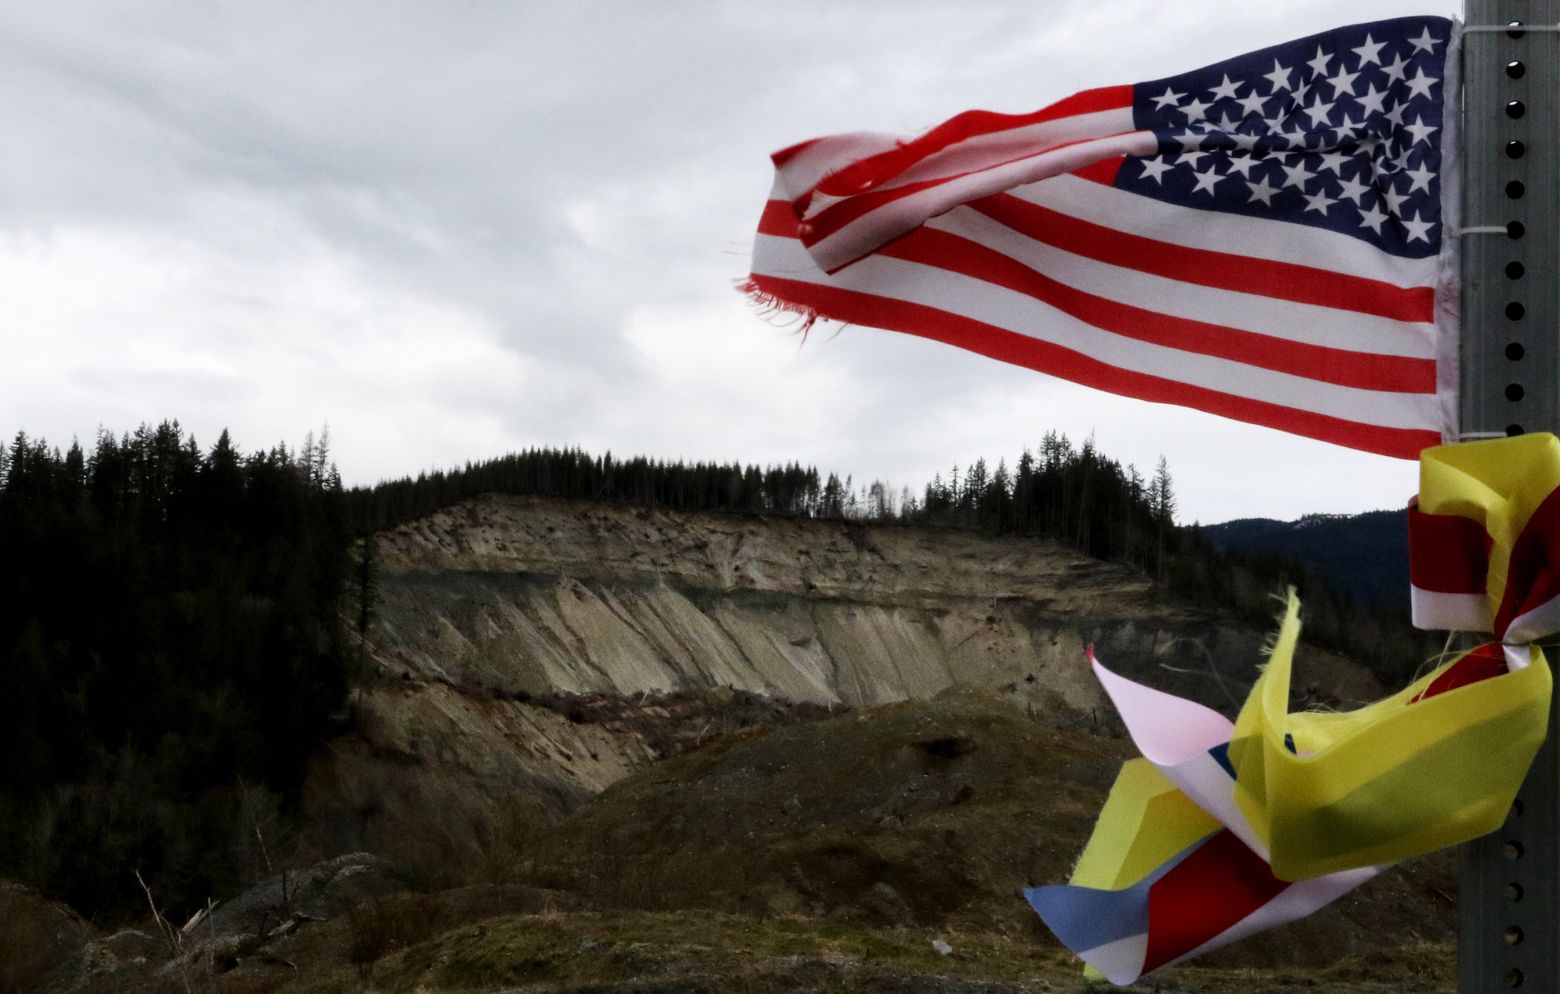 Oso, 3 years on: Wrestling with lessons from deadly landslide, and how to protect people elsewhere